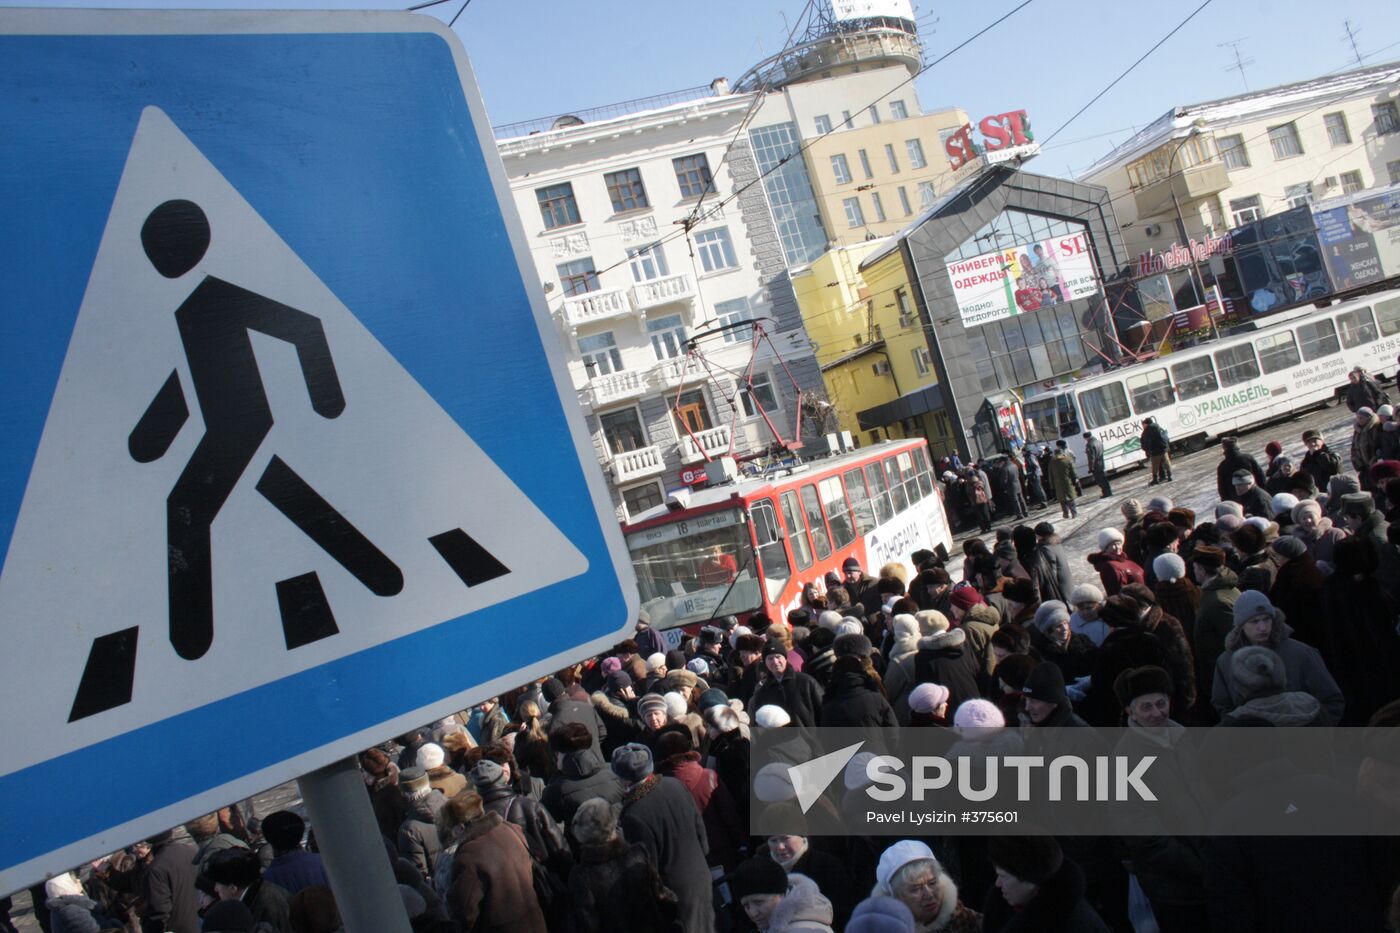 Rally against monetization of social benefits in Yekaterinburg